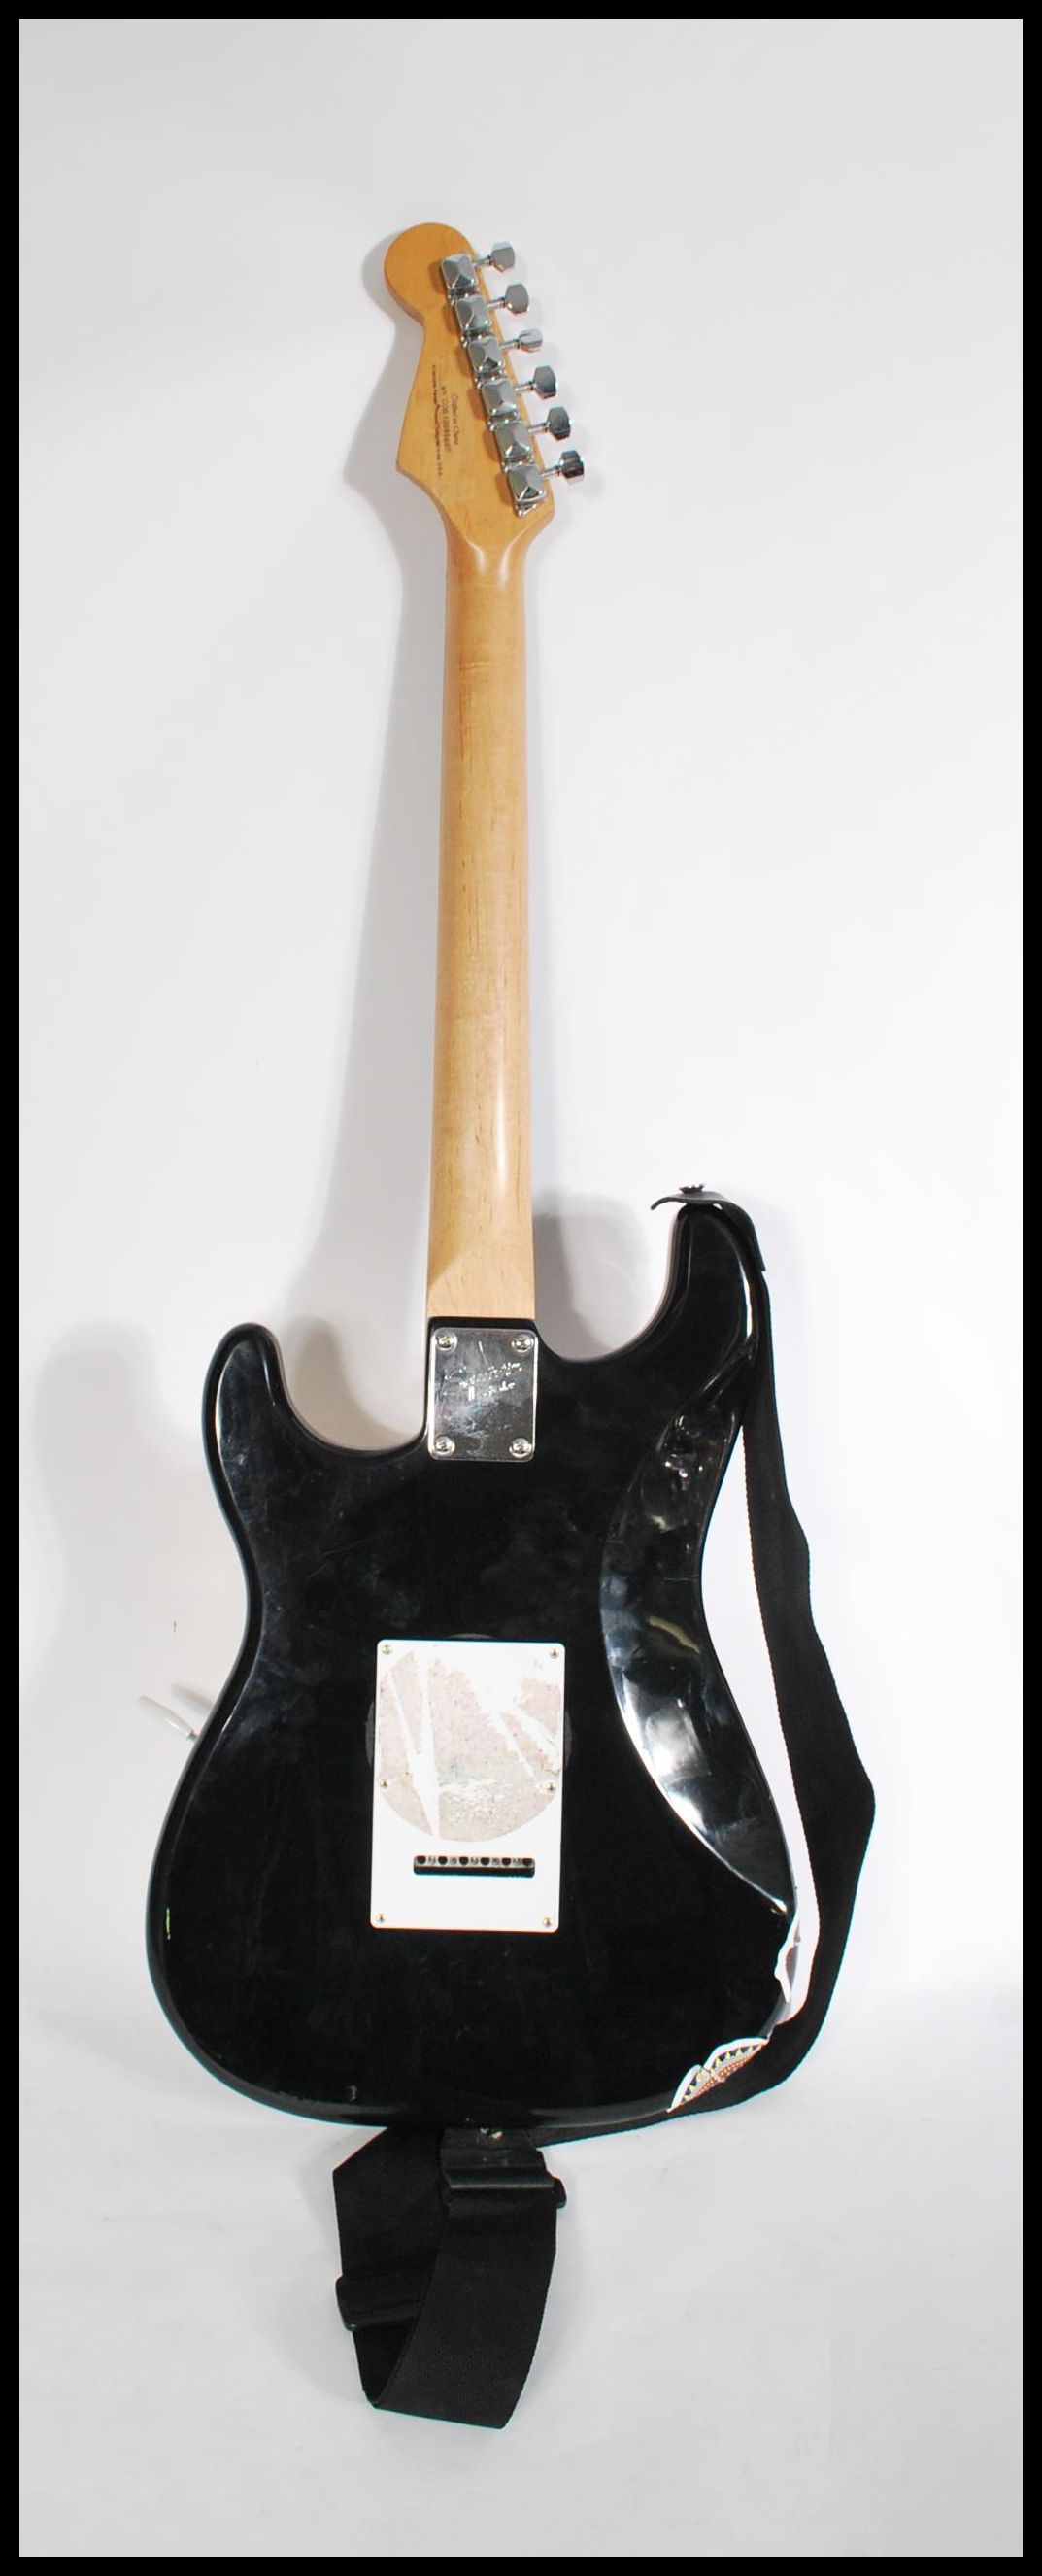 A squire Bullet Strat by Fender Stratocaster six string electric guitar, white body serial number - Image 4 of 6